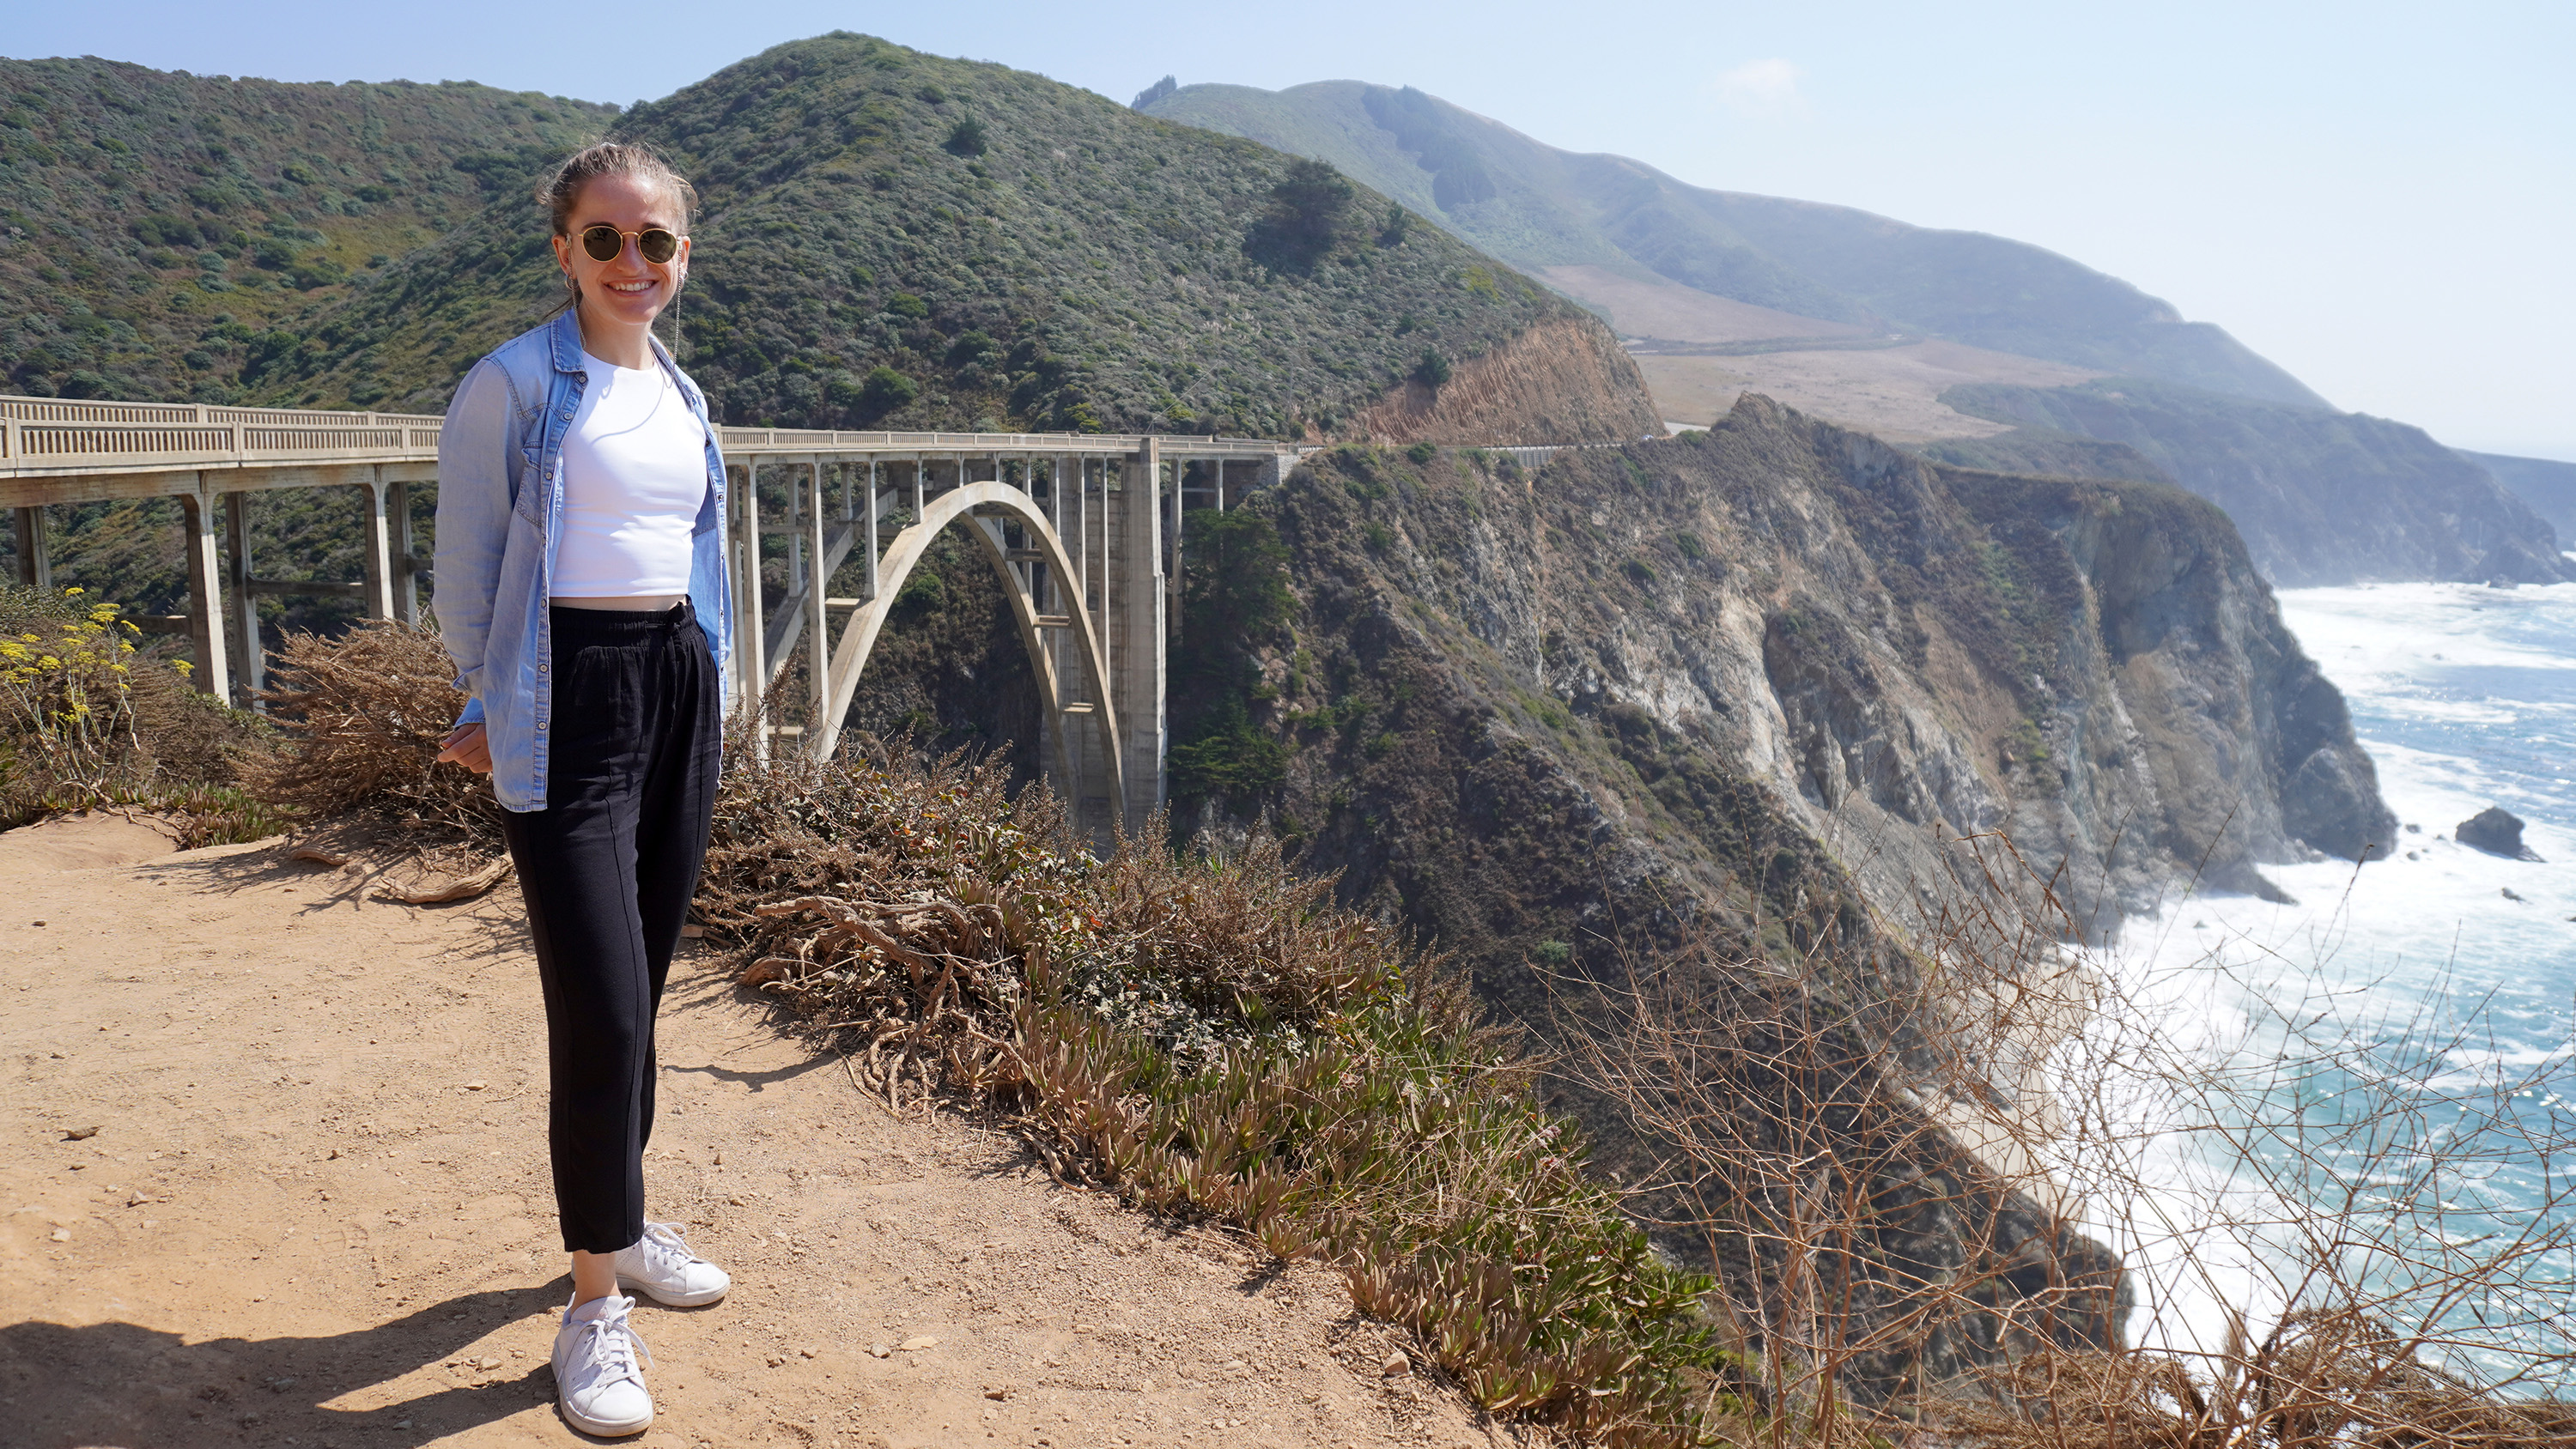 Charikleia is passionate about bridge structures. She stands in front of the Bixby Creek Bridge during her recent trip to the US.